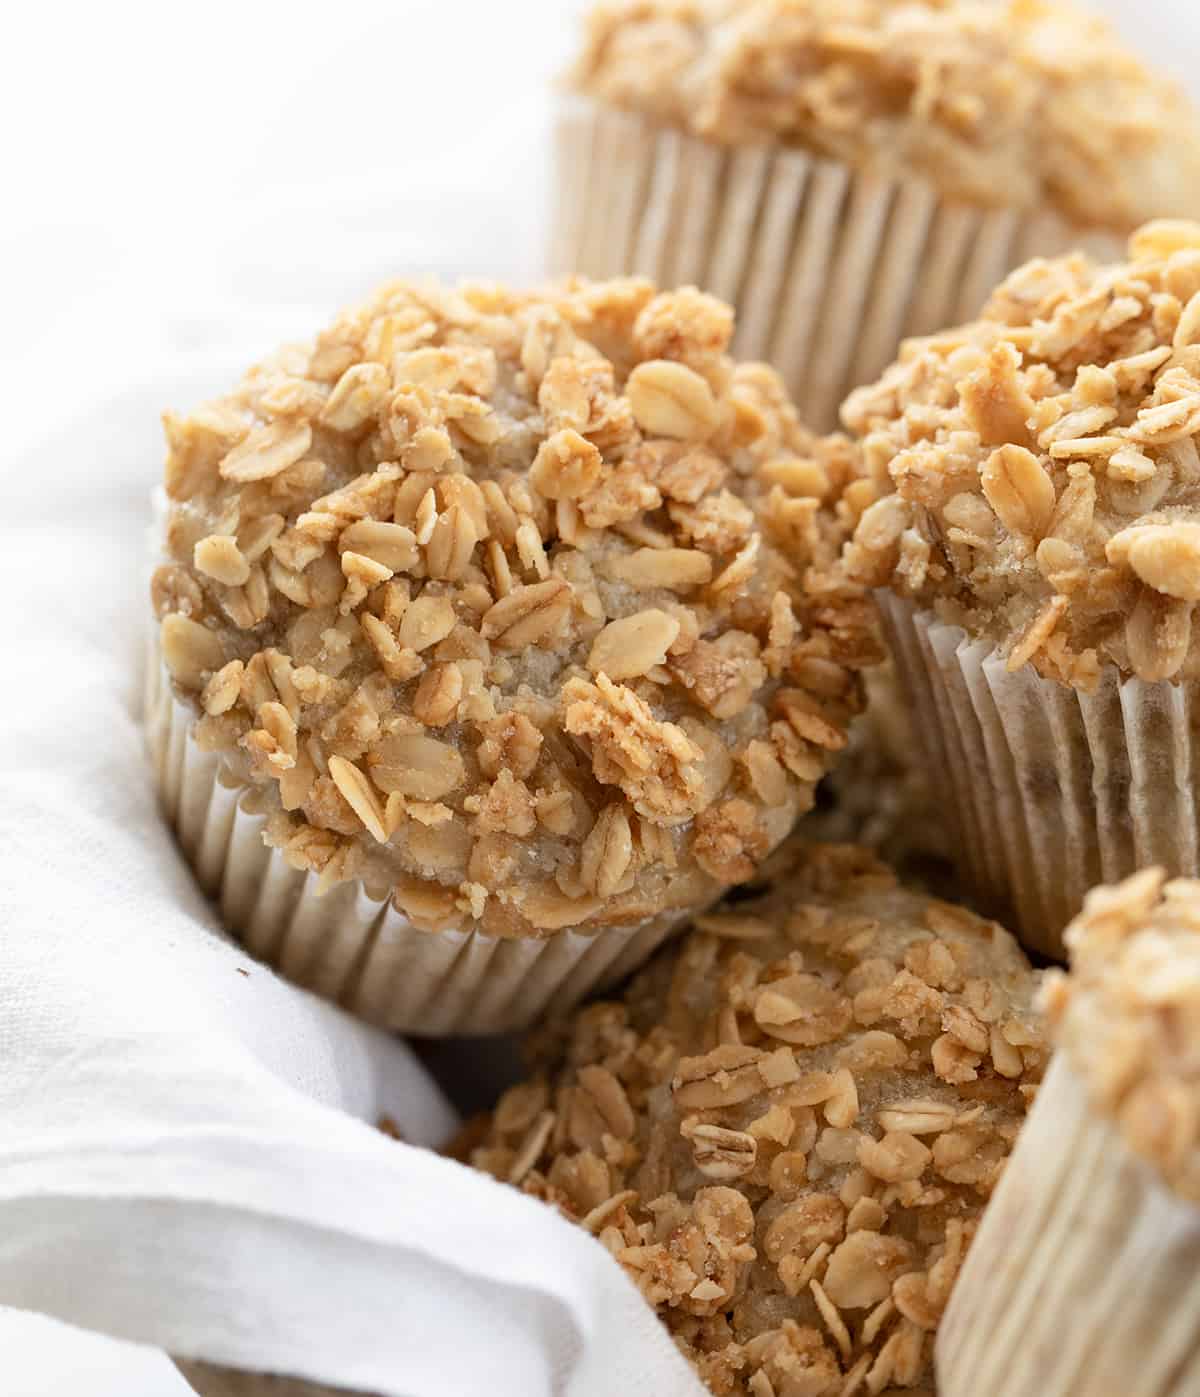 Close up of Banana Crunch Muffins in a Basket on a White Towel Showing Tops.